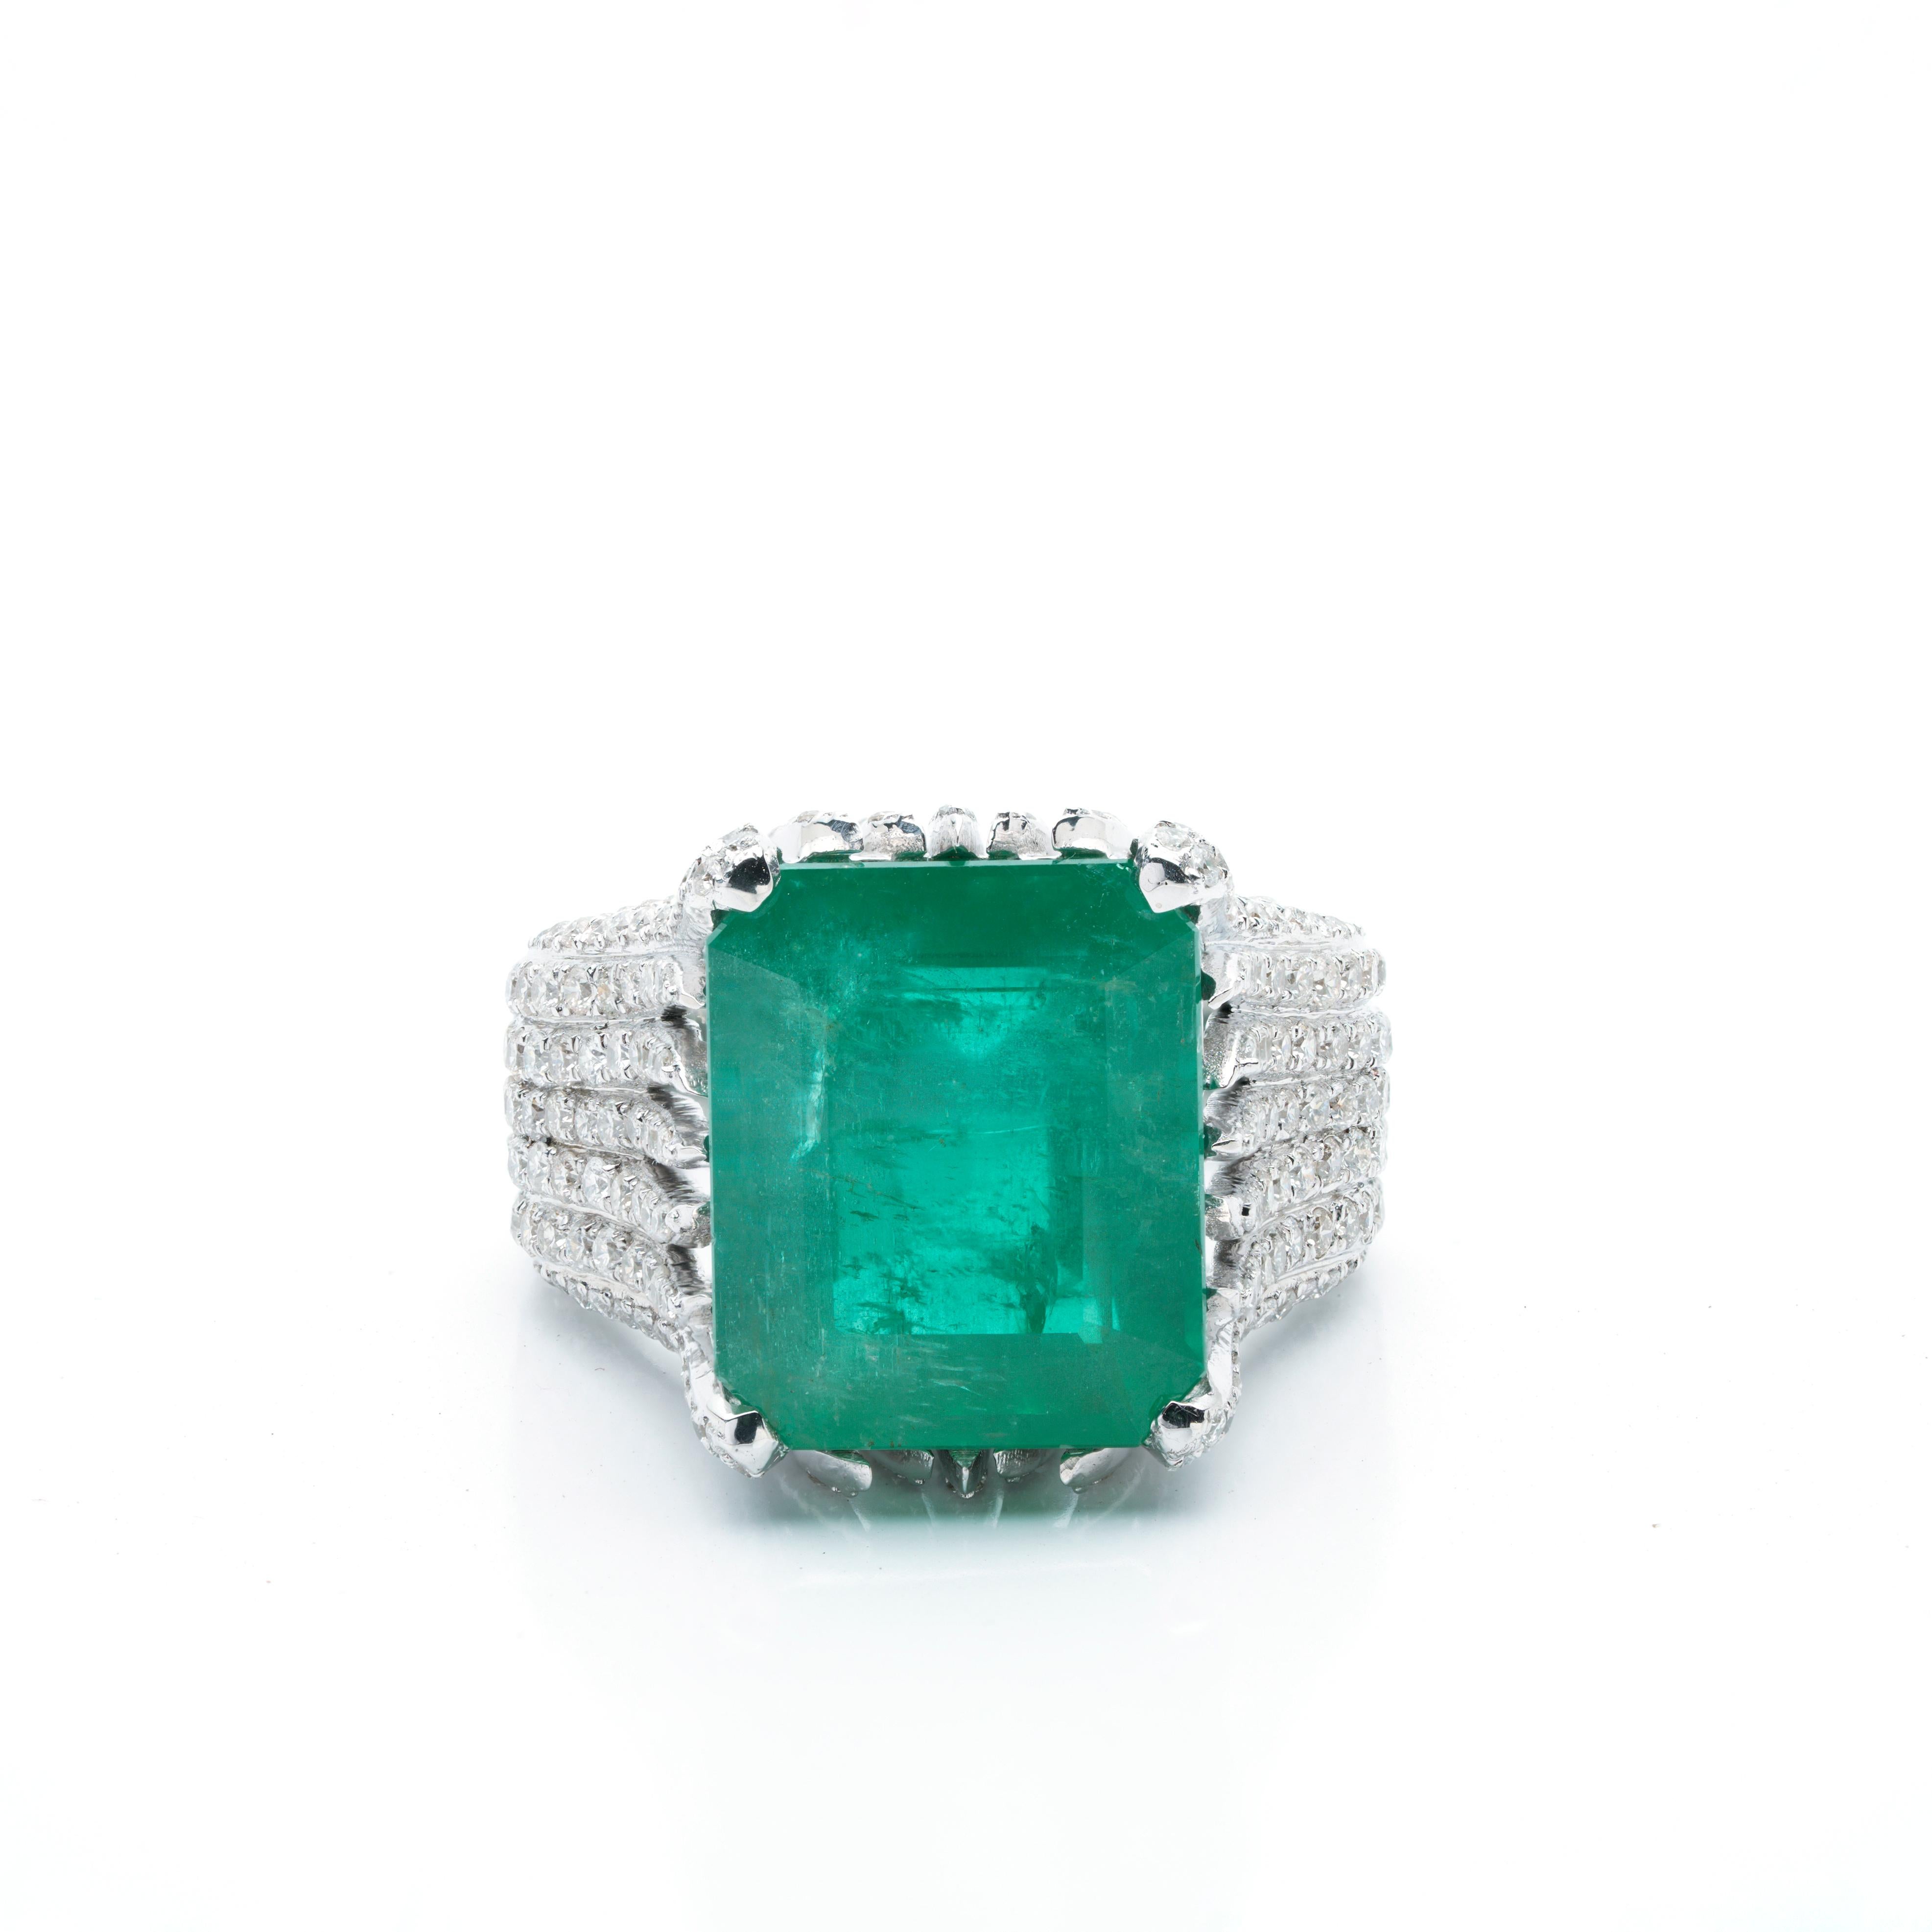 Emerald : 9.75 carats
Diamonds : 2.10 carats
Gold : 7.91 gms (14k)

Emerald is of very high quality and good quality diamonds ( vsi) and G colour
Diamonds : 2.52 carats
Gold : 16.09 gms (18k)

Its very hard to capture the true color and luster of